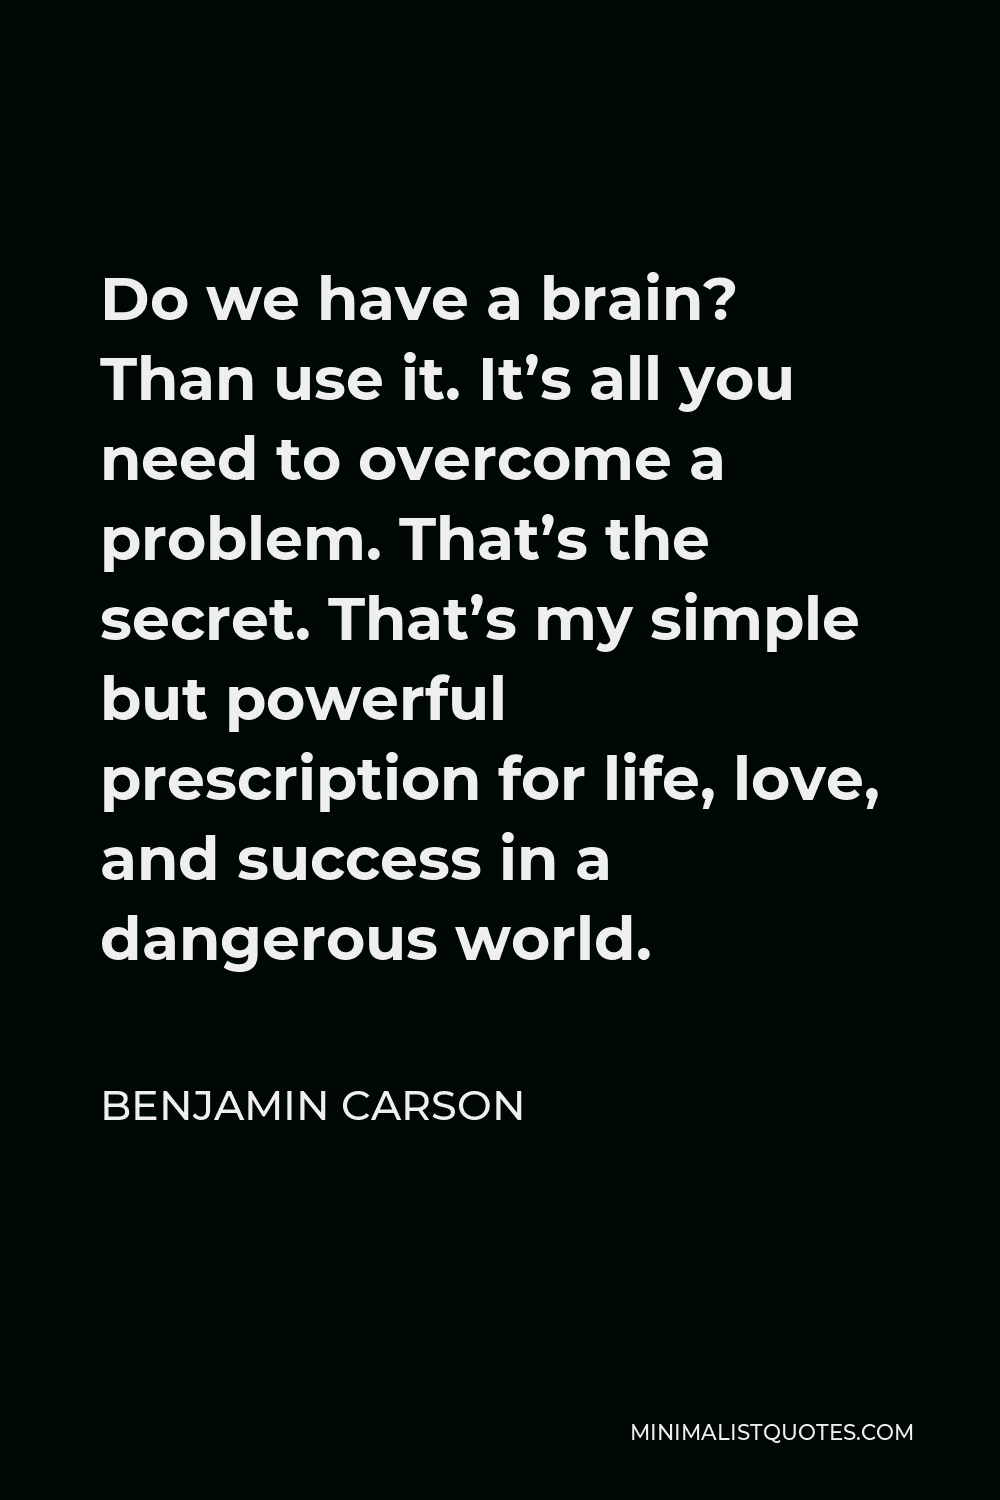 Benjamin Carson Quote - Do we have a brain? Than use it. It’s all you need to overcome a problem. That’s the secret. That’s my simple but powerful prescription for life, love, and success in a dangerous world.